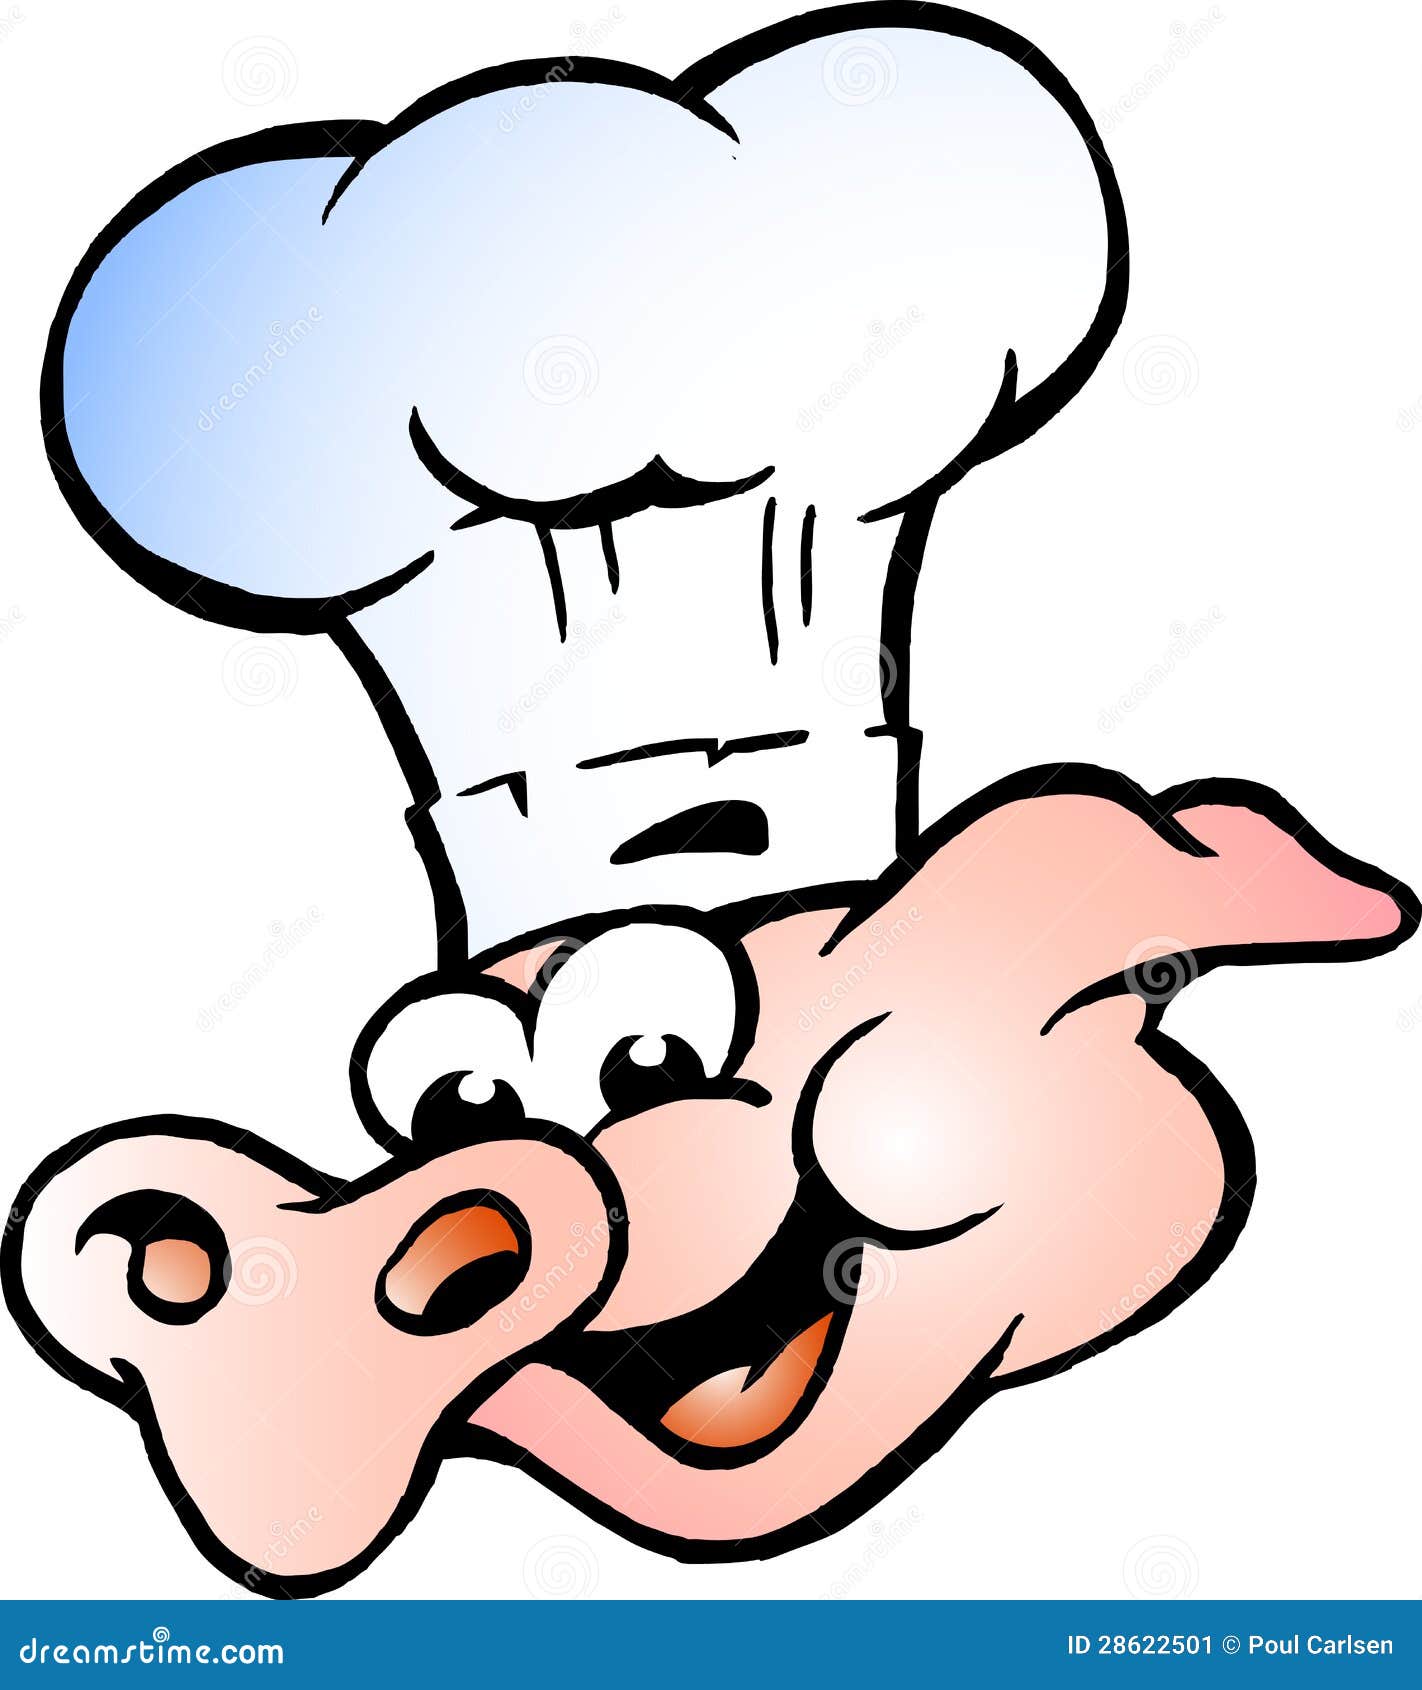 pig clipart vector - photo #45